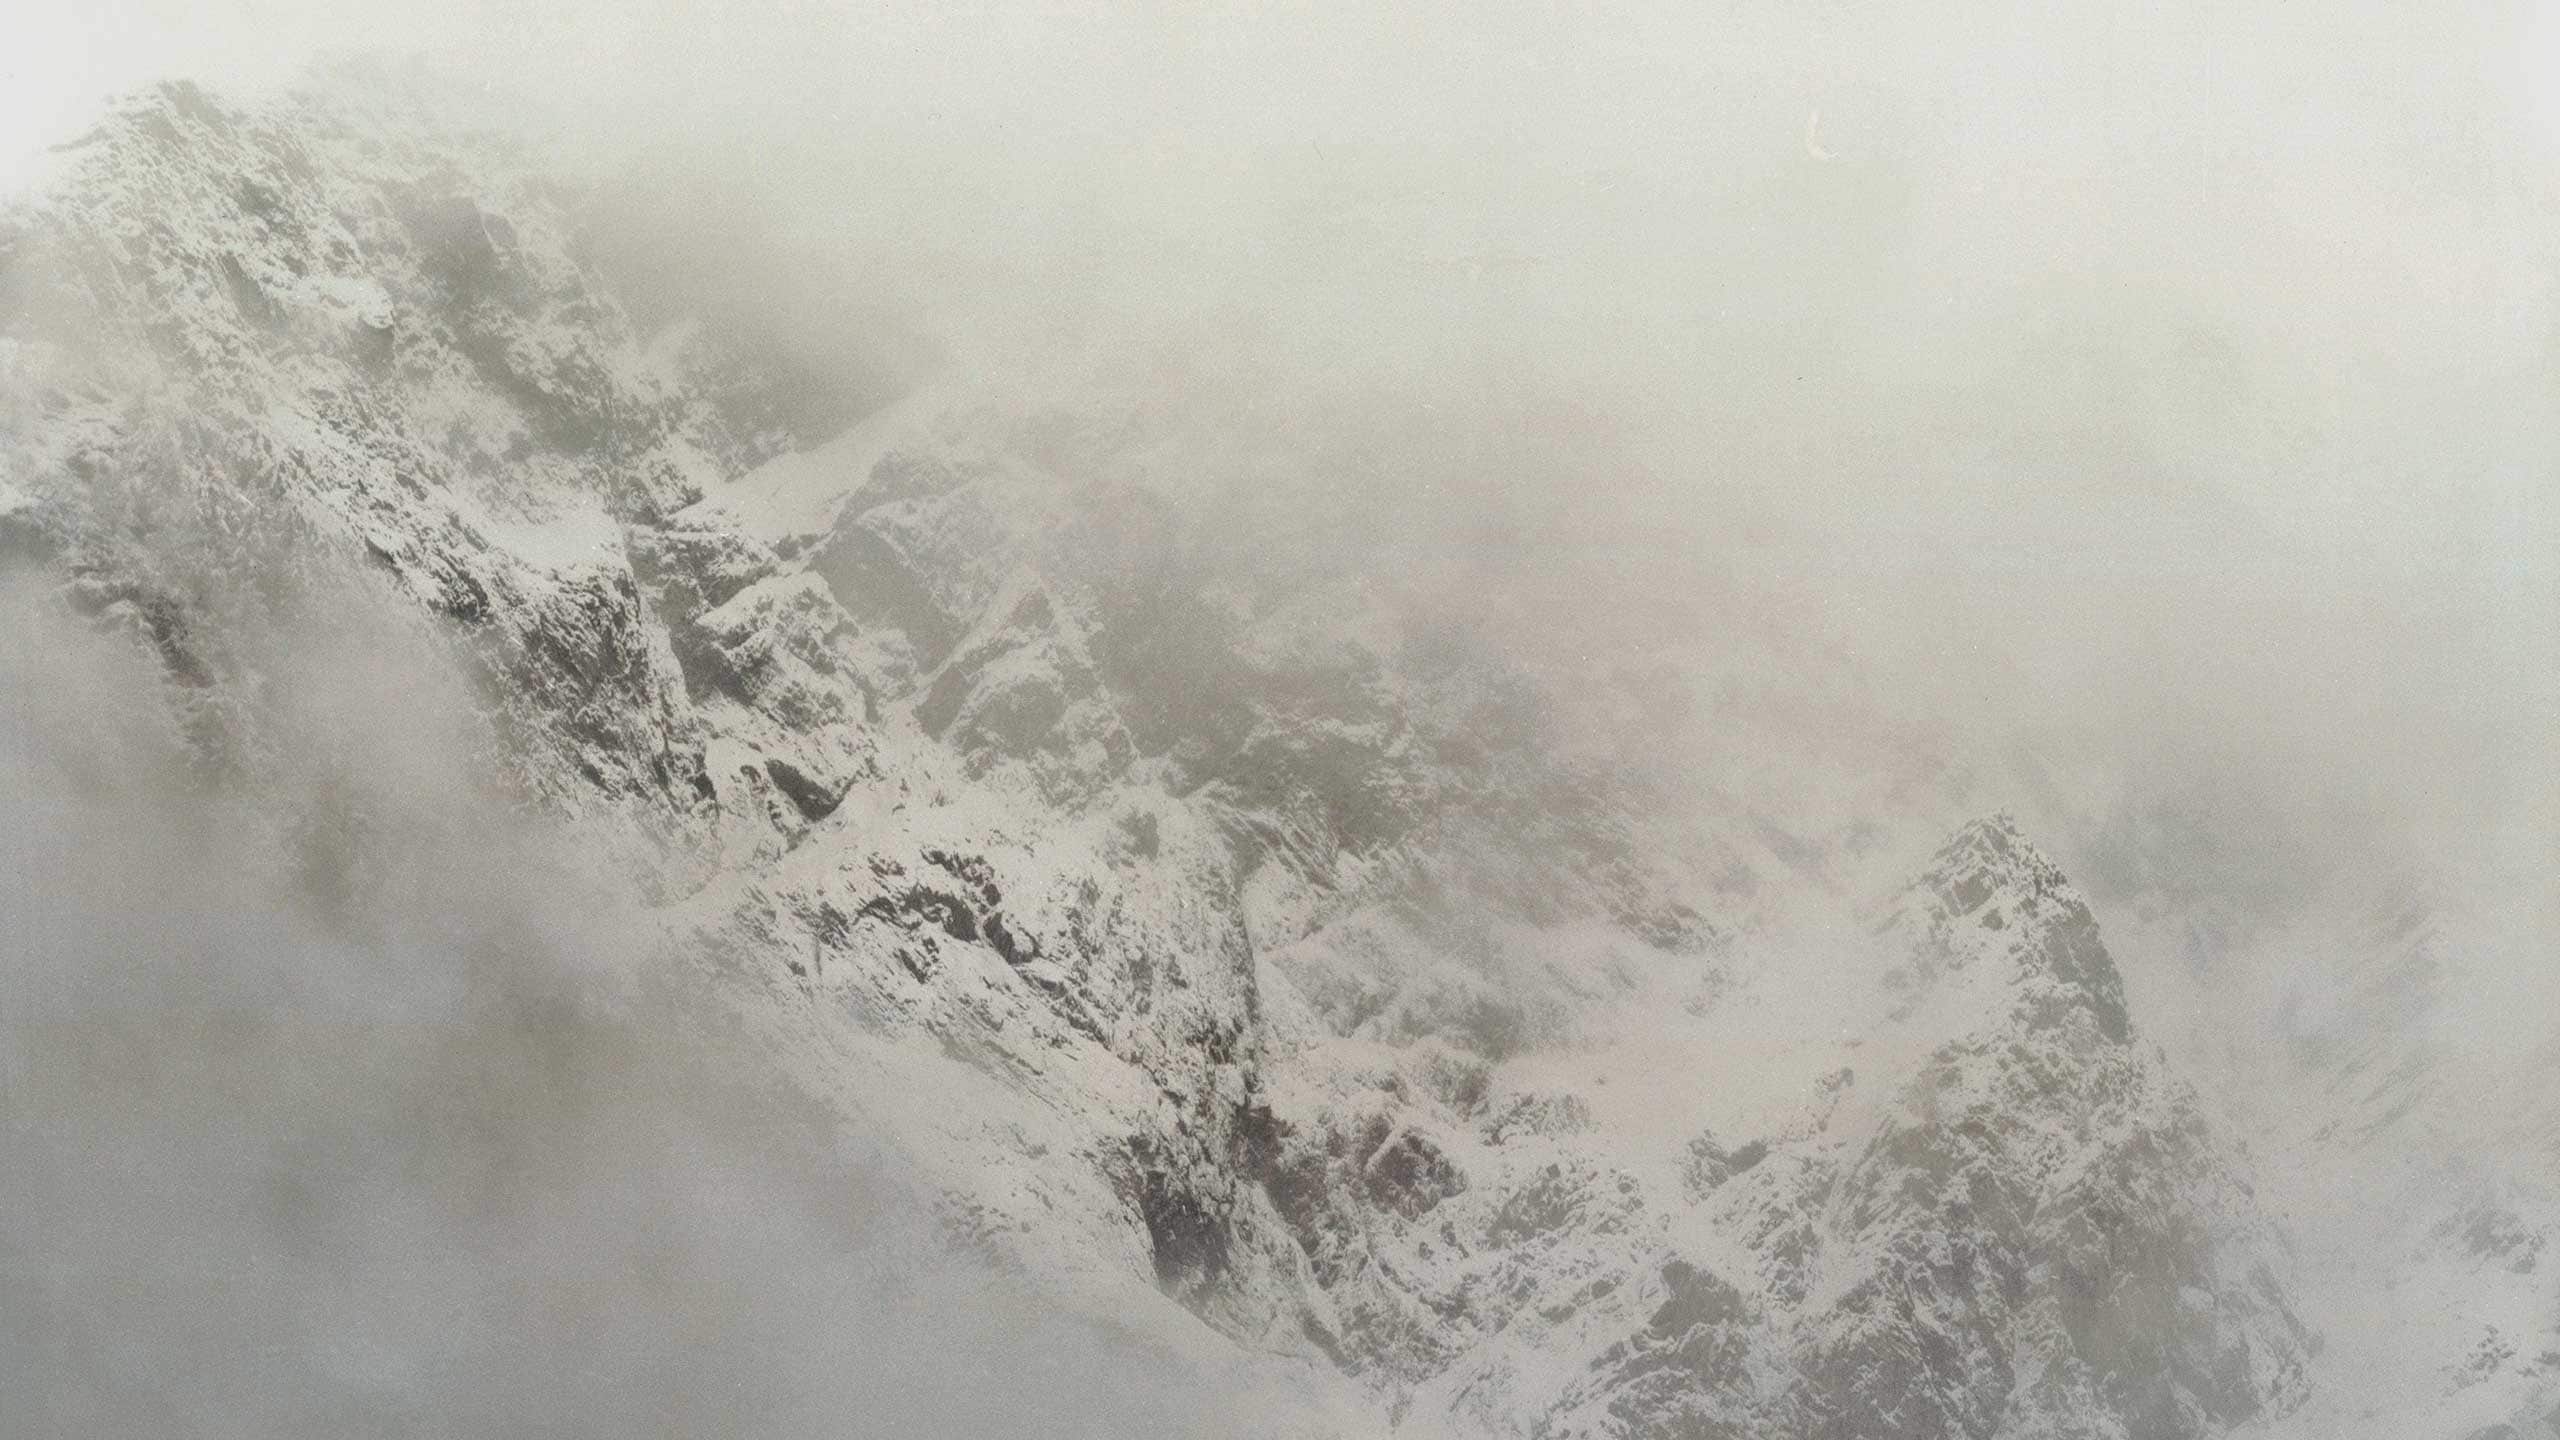 A winter snowy mountain surrounded by fog.